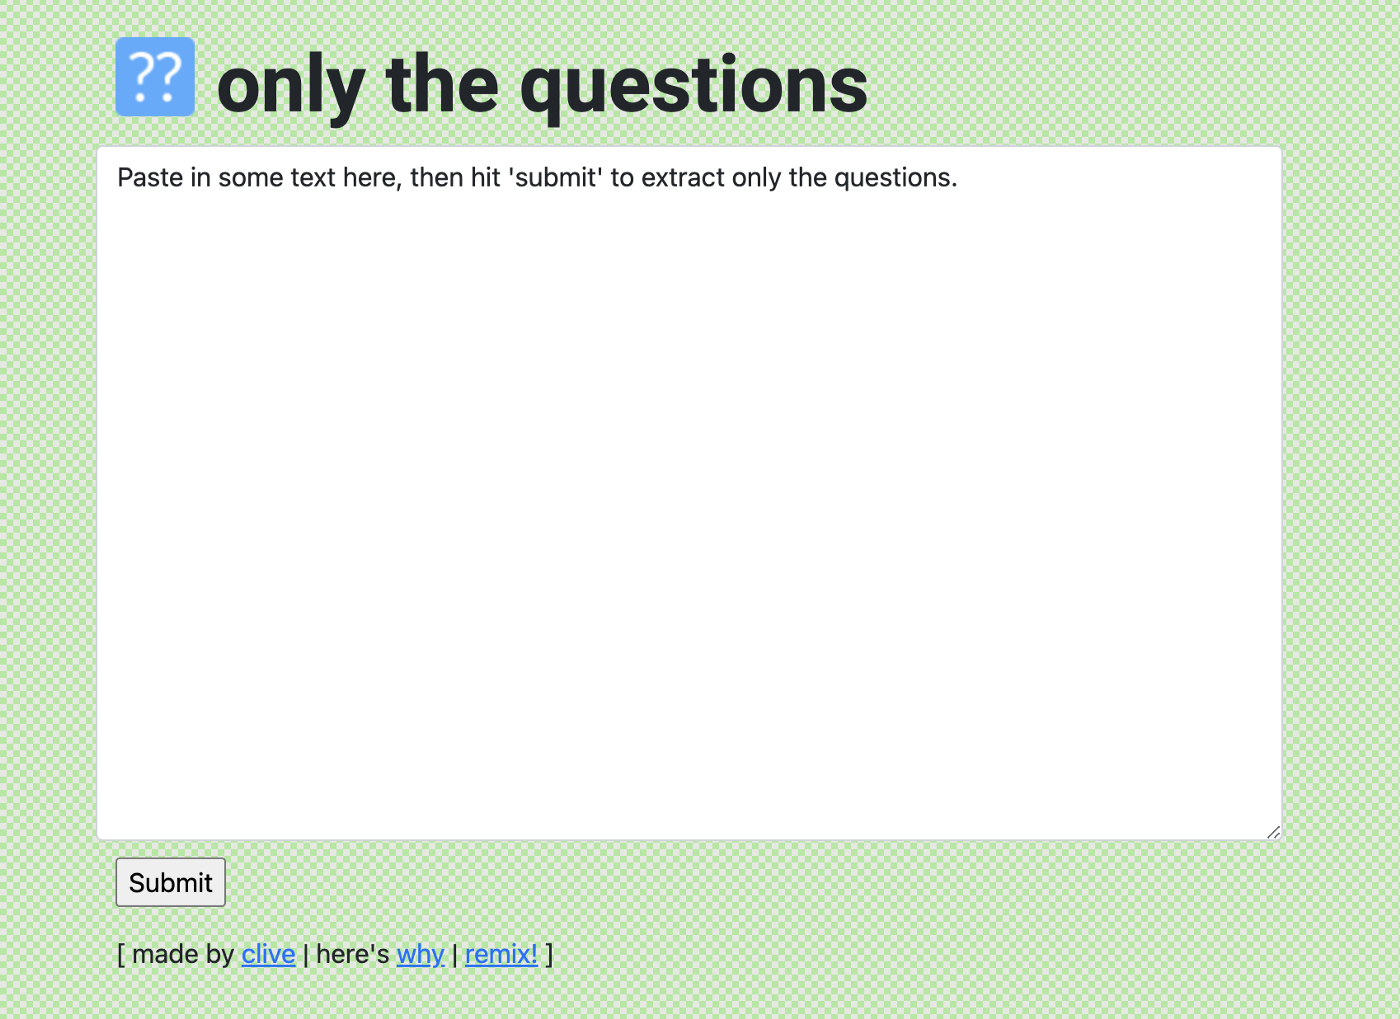 A screenshot of the “only the questions” app